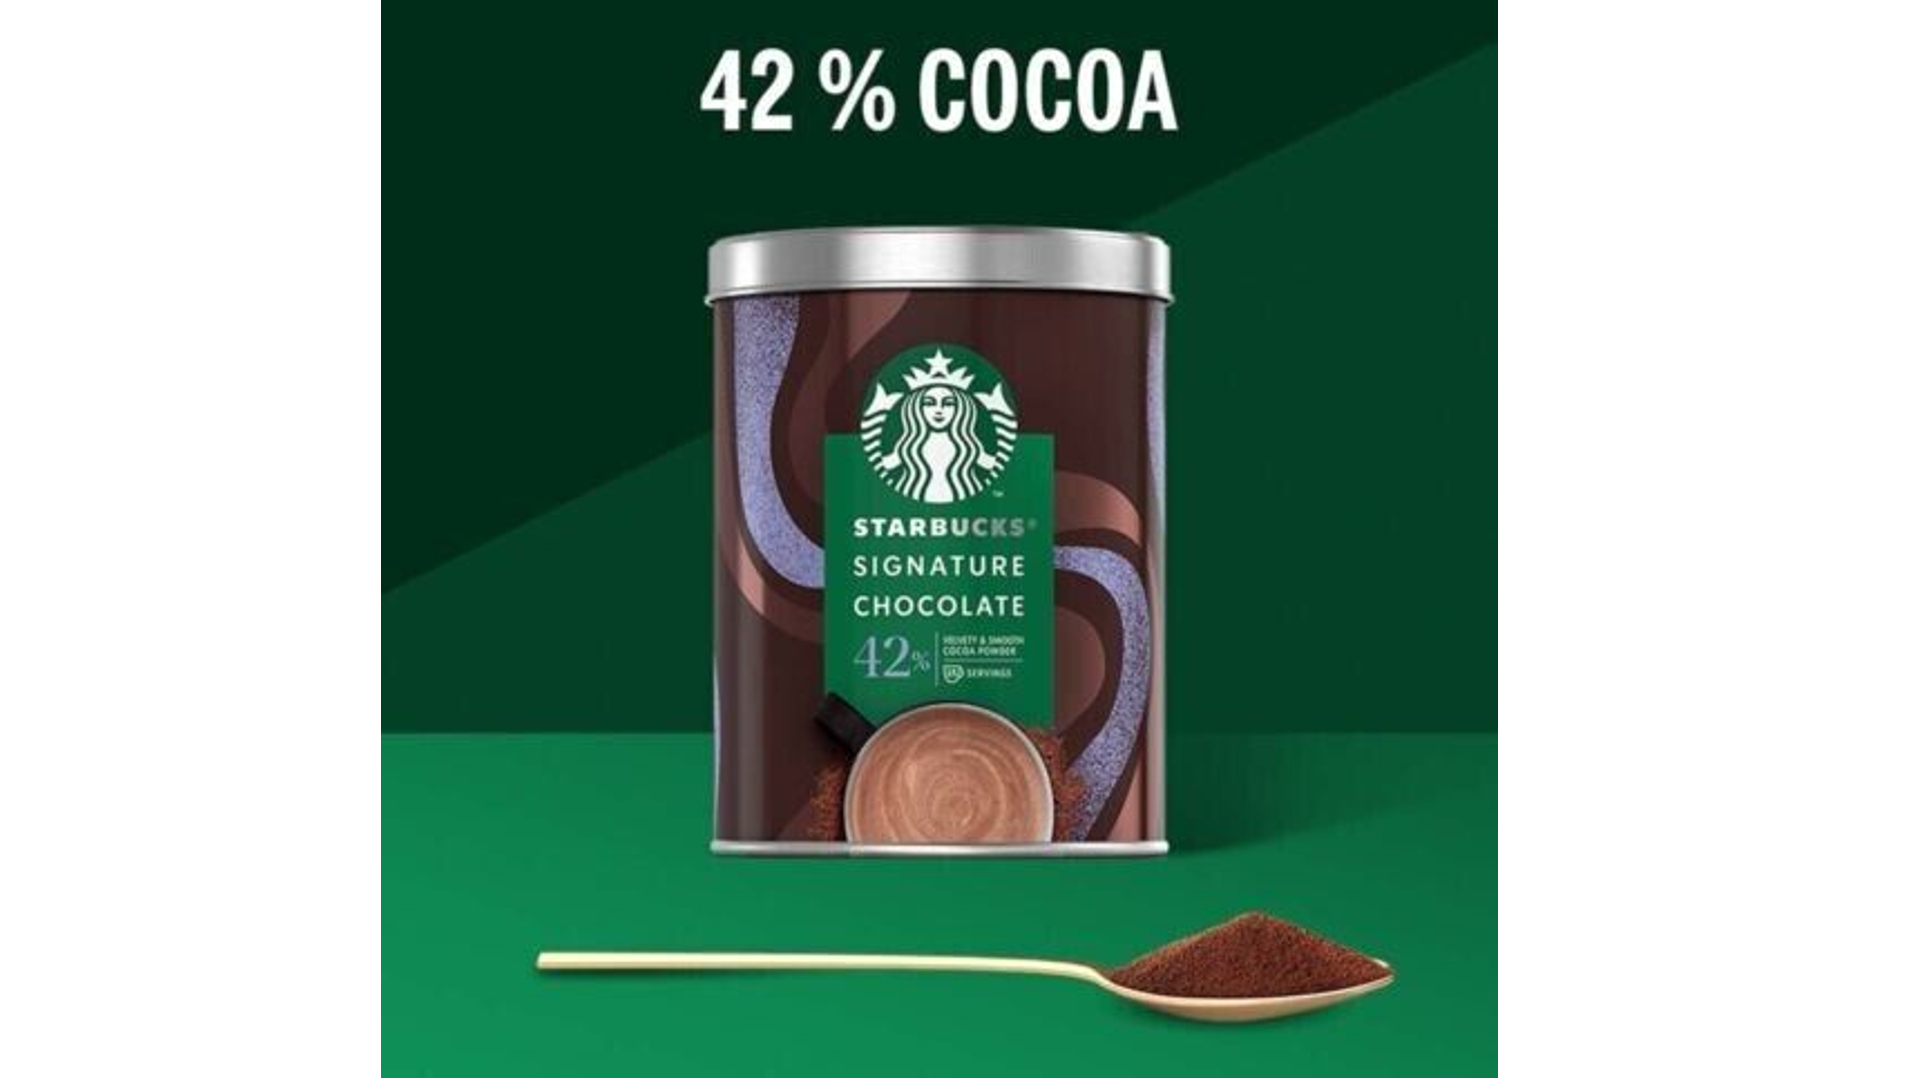 https://www.confectionerynews.com/var/wrbm_gb_food_pharma/storage/images/publications/food-beverage-nutrition/confectionerynews.com/news/regulation-safety/starbucks-targeted-by-campaigners-over-lack-of-transparency-in-its-cocoa-supply/16667156-1-eng-GB/Starbucks-targeted-by-campaigners-over-lack-of-transparency-in-its-cocoa-supply.png